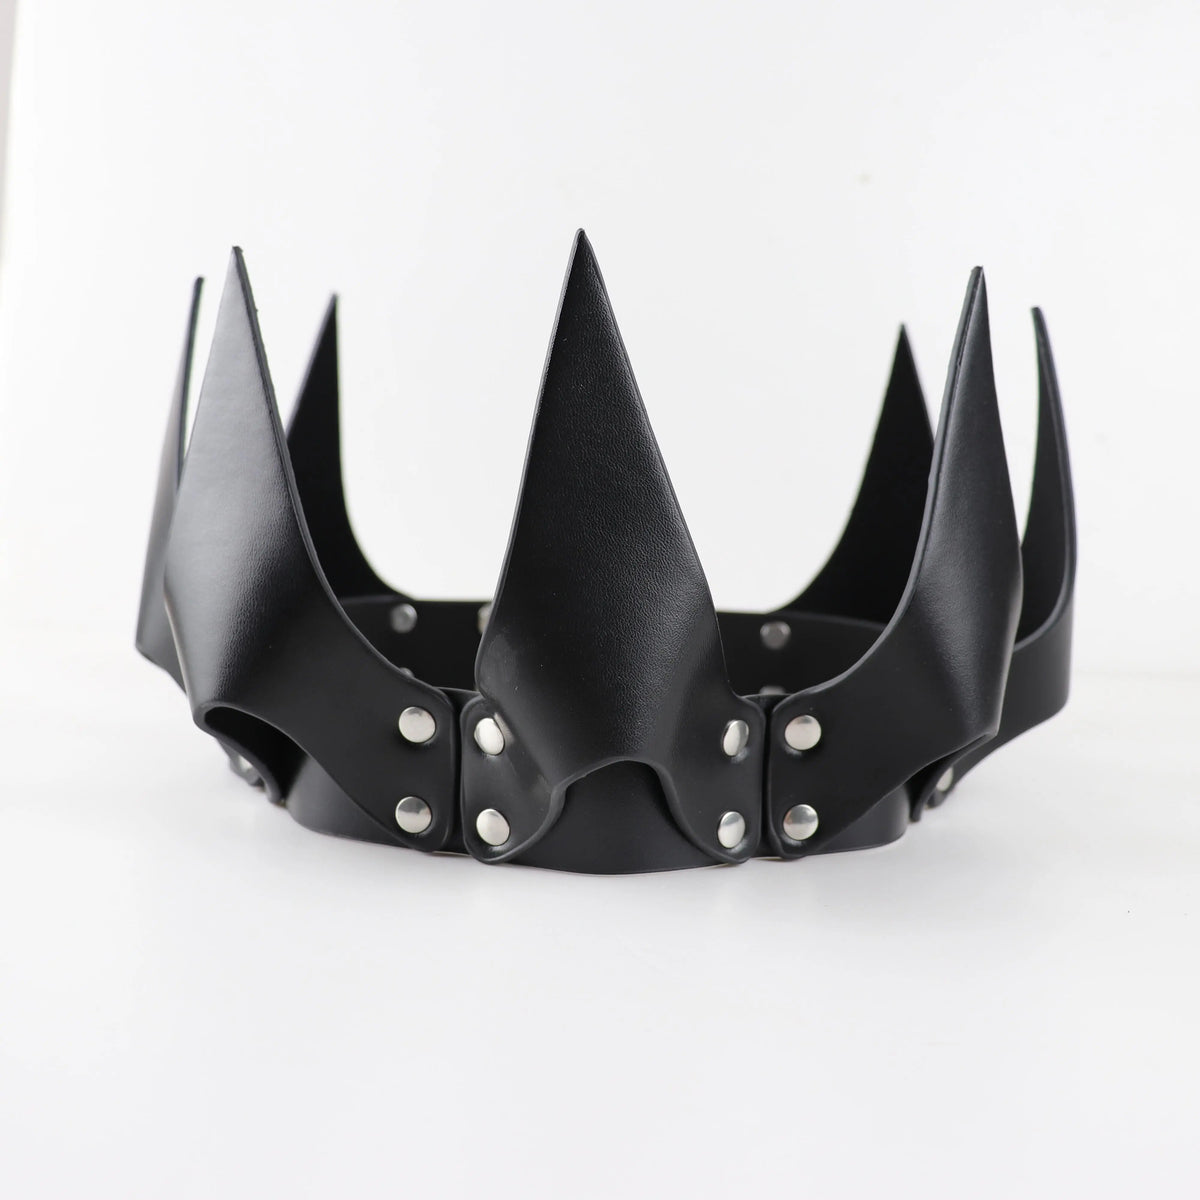 Erotic Sexy Mask Cosplay Leather Sex Mask Leather Harness Halloween Party Masquerade Ball Fancy Crown Masks Punk Sex Toy